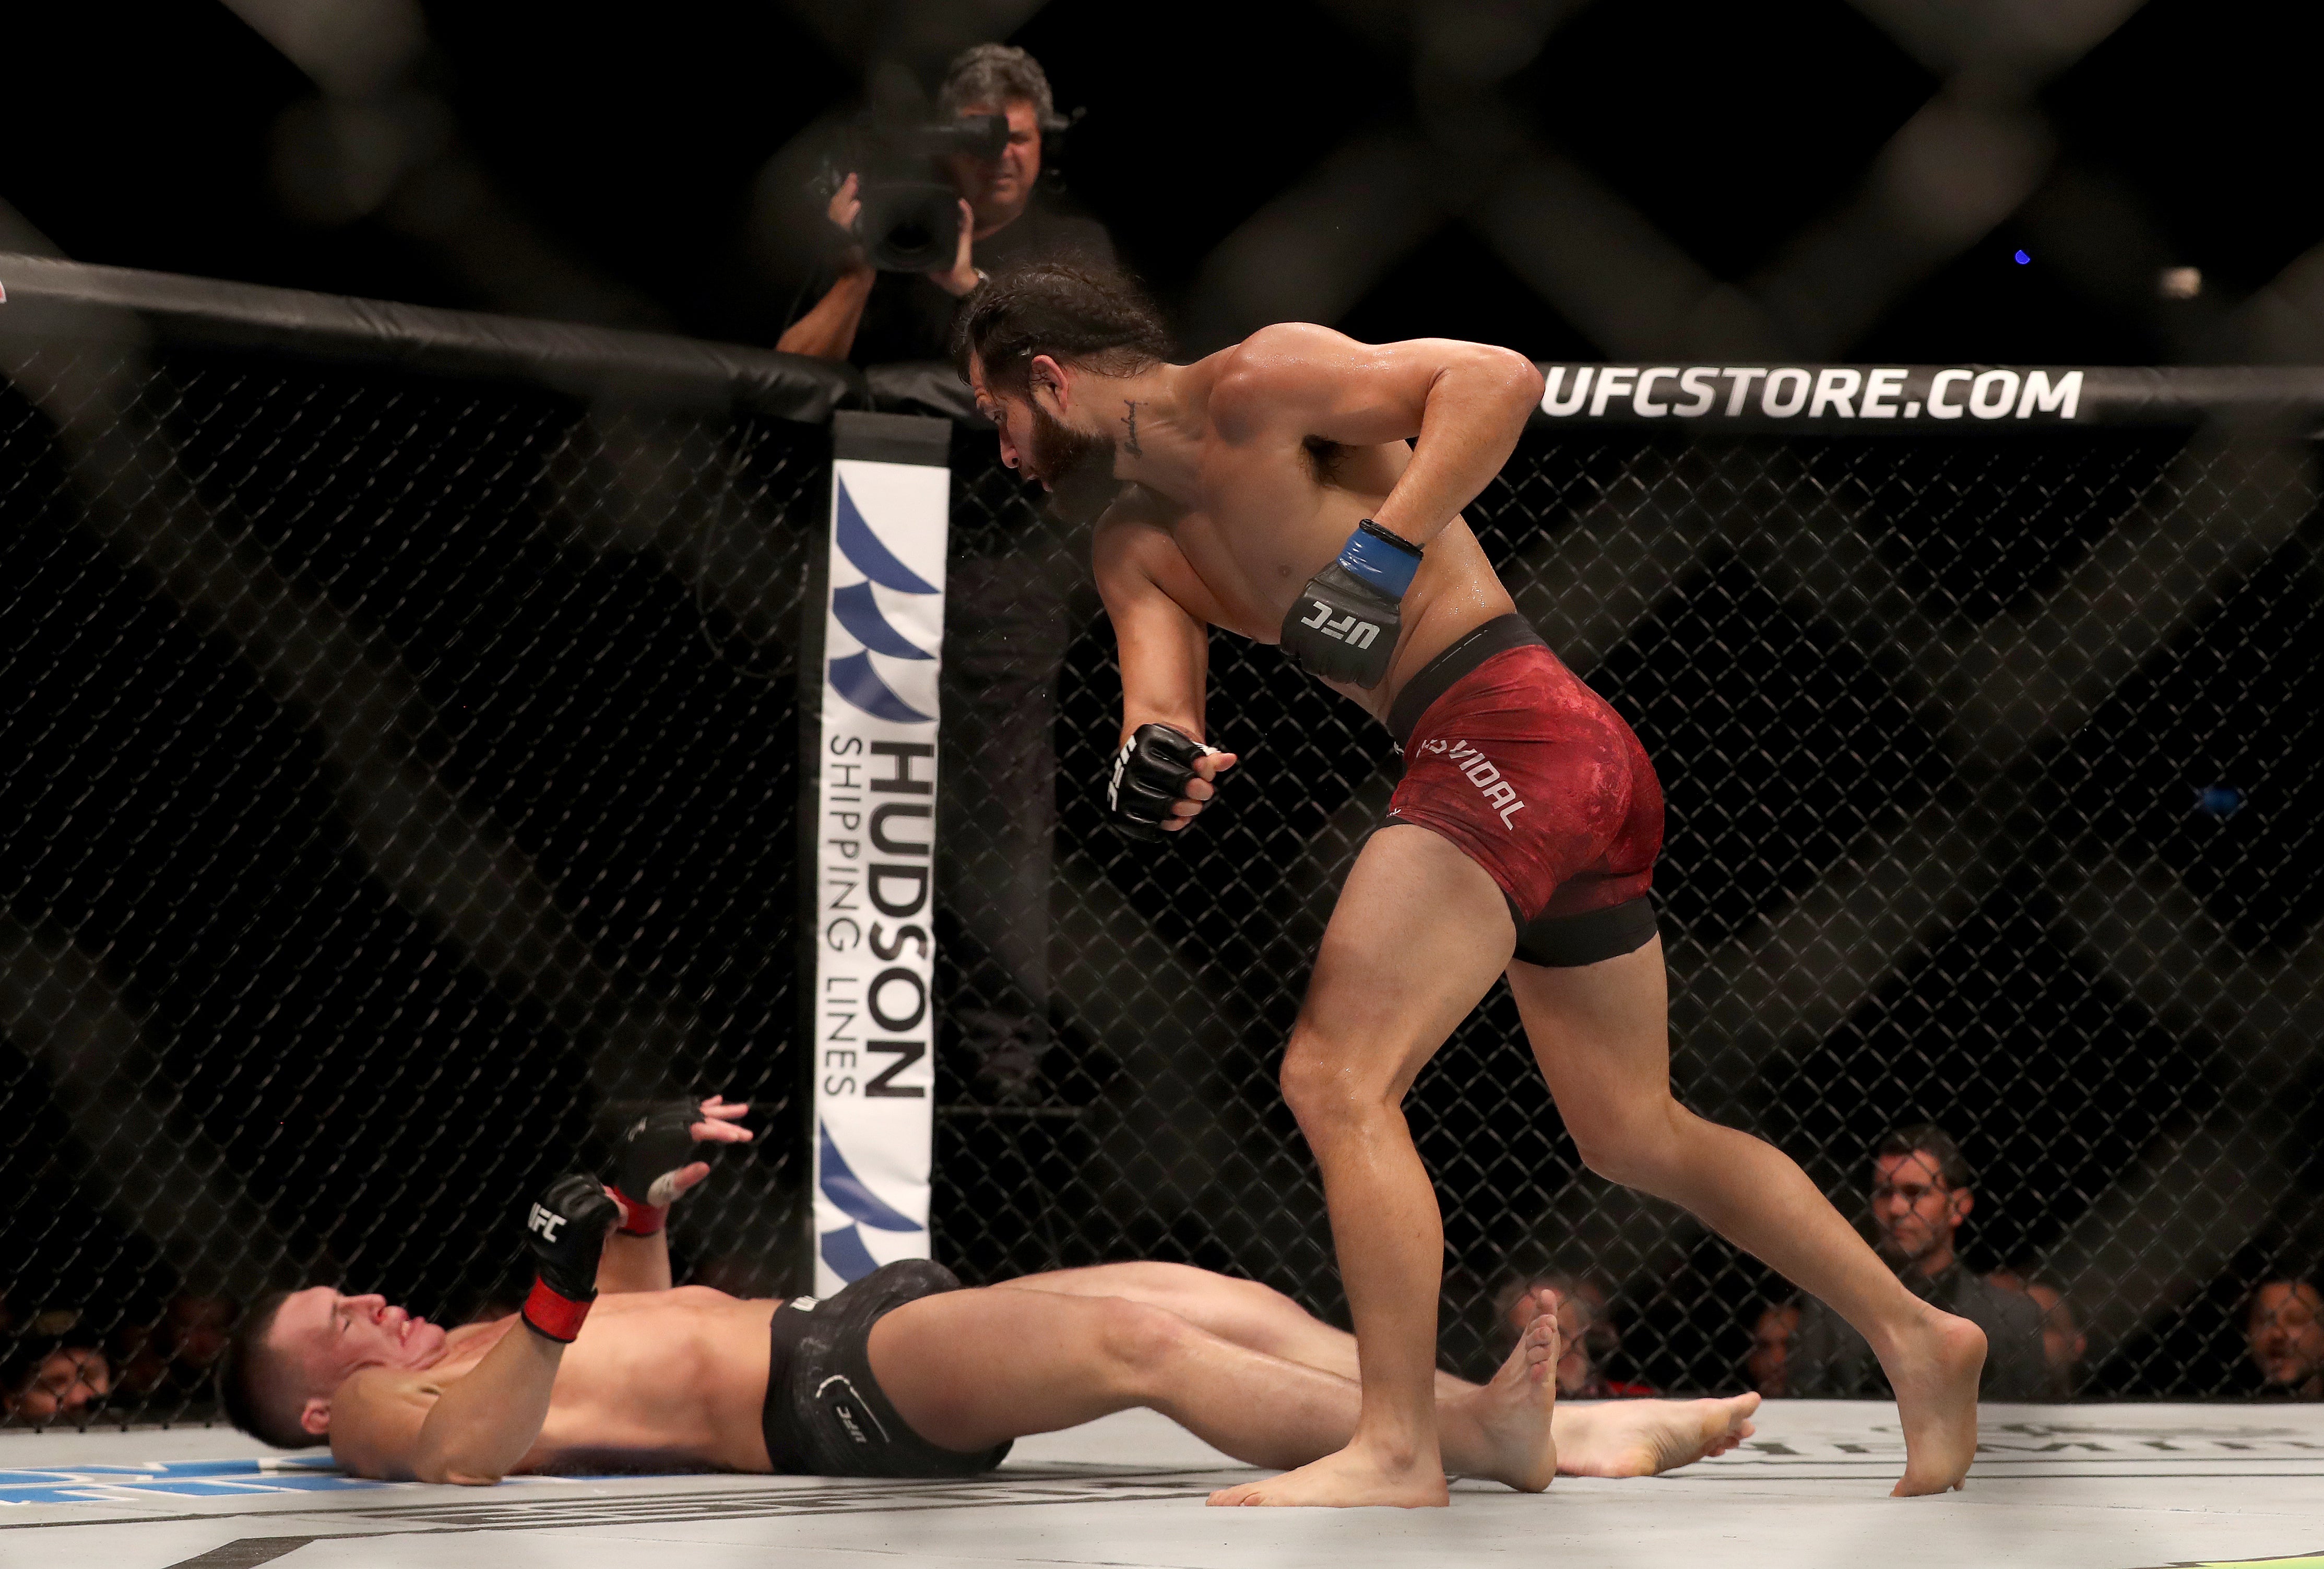 Jorge Masvidal knocked out Liverpool’s Darren Till at UFC London in March 2019